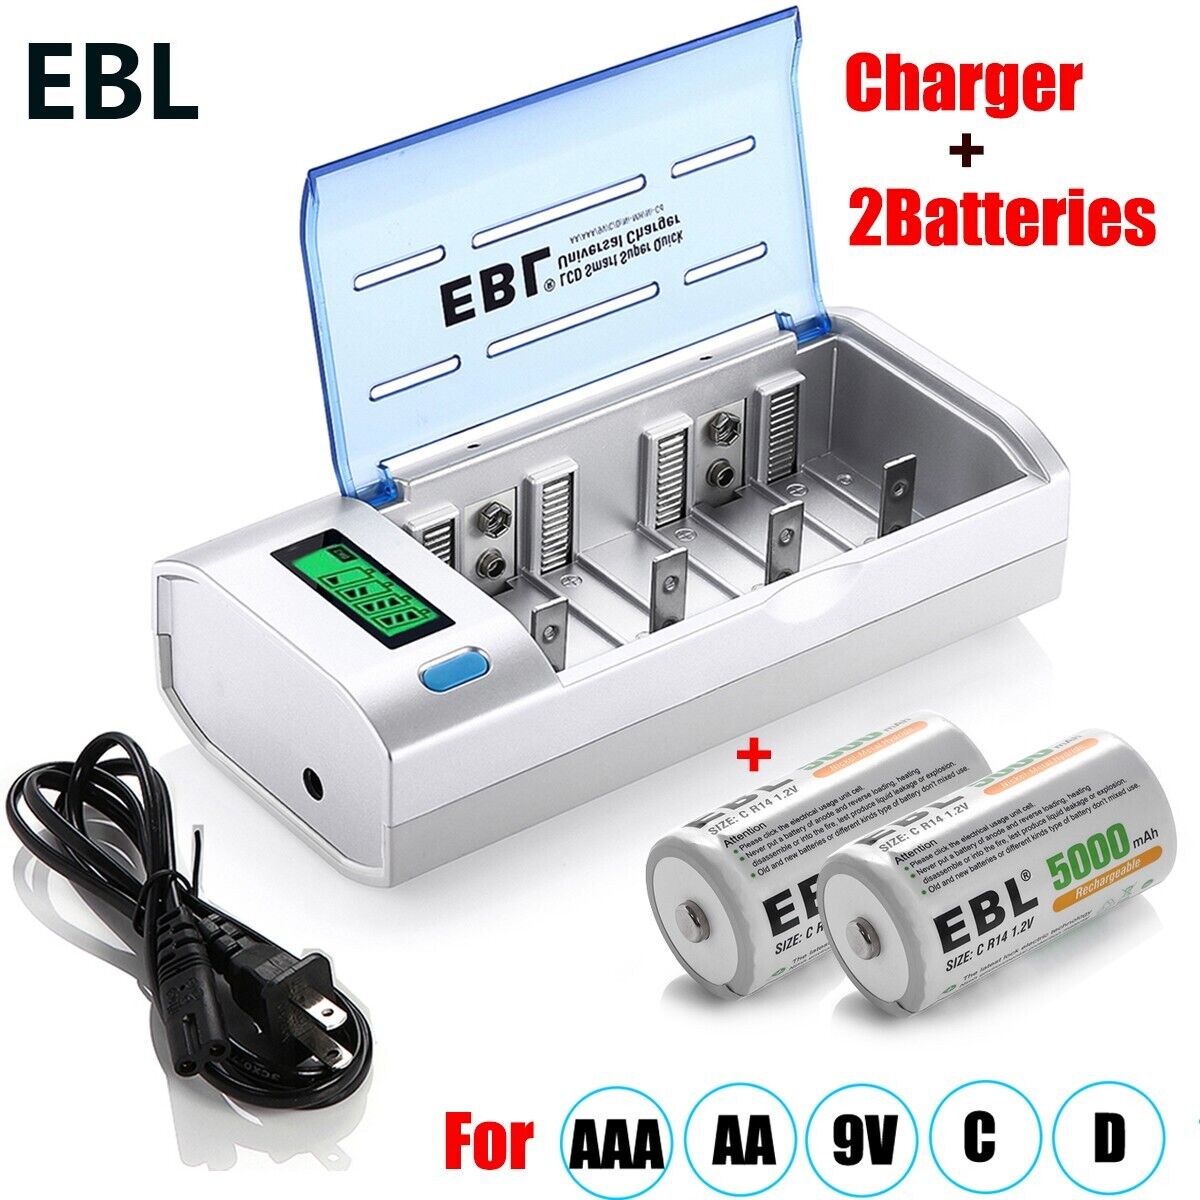 EBL LCD Smart Charger For AA AAA C D 9V Rechargeable Battery + 2 C Size Battery